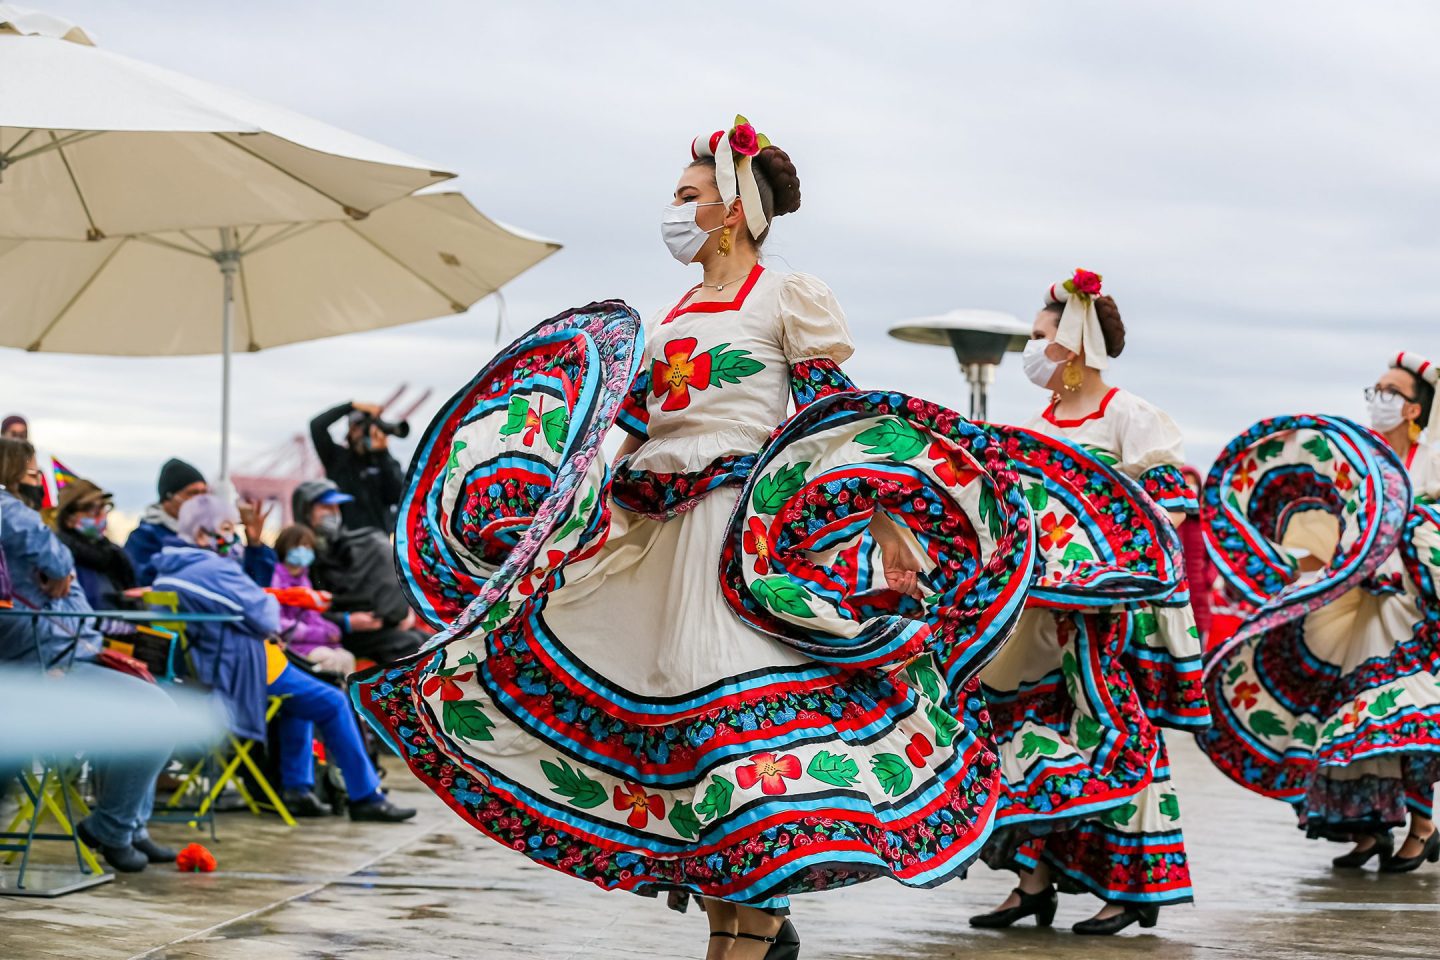 Women wearing white dresses with colorful hemming and embroidery dance.